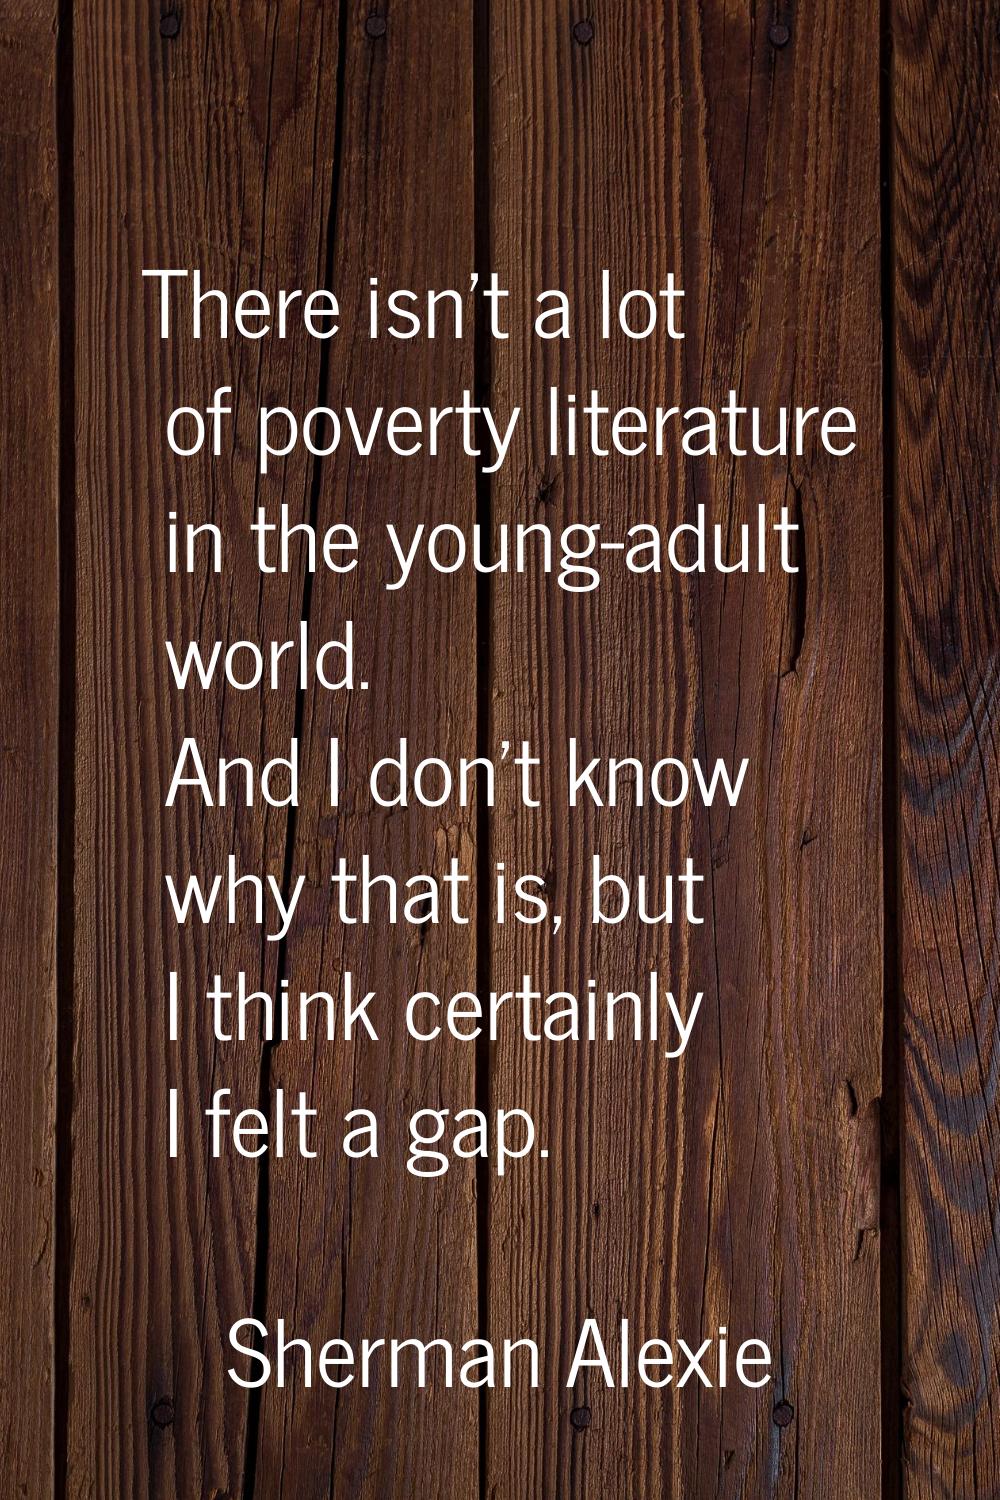 There isn't a lot of poverty literature in the young-adult world. And I don't know why that is, but